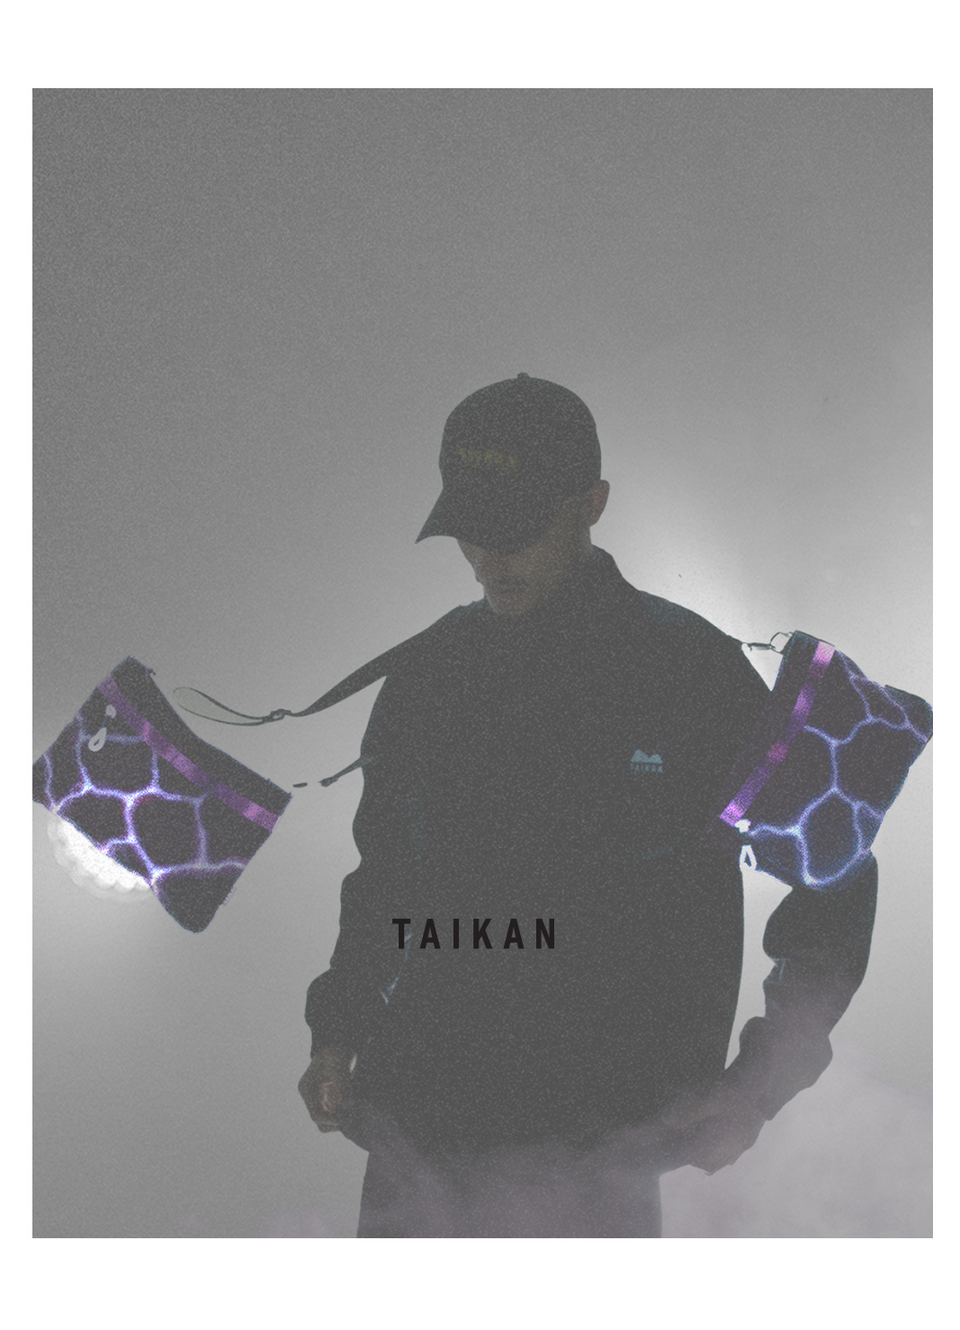 TAIKAN BY TRAVIS SPINKS